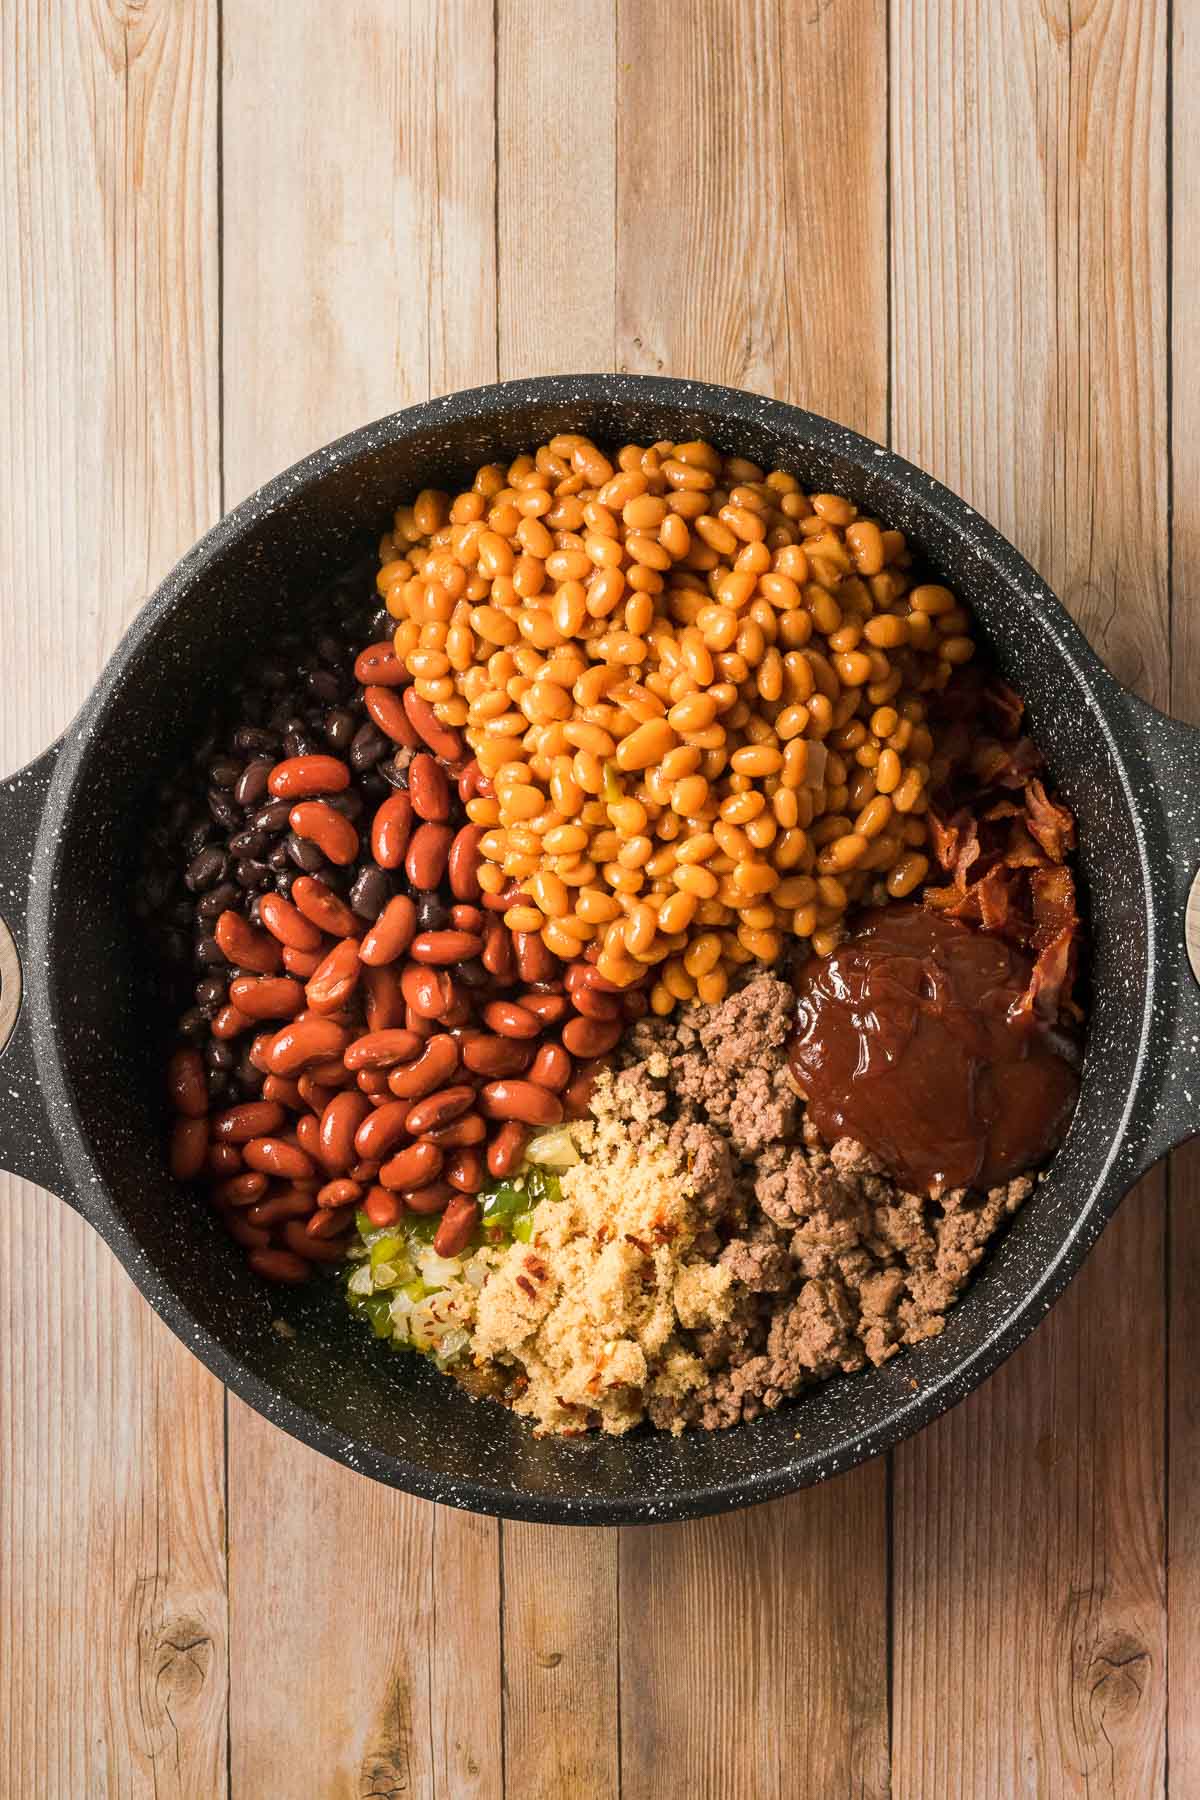 All the ingredients for cowboy baked beans with ground beef ready to cook in a pot.